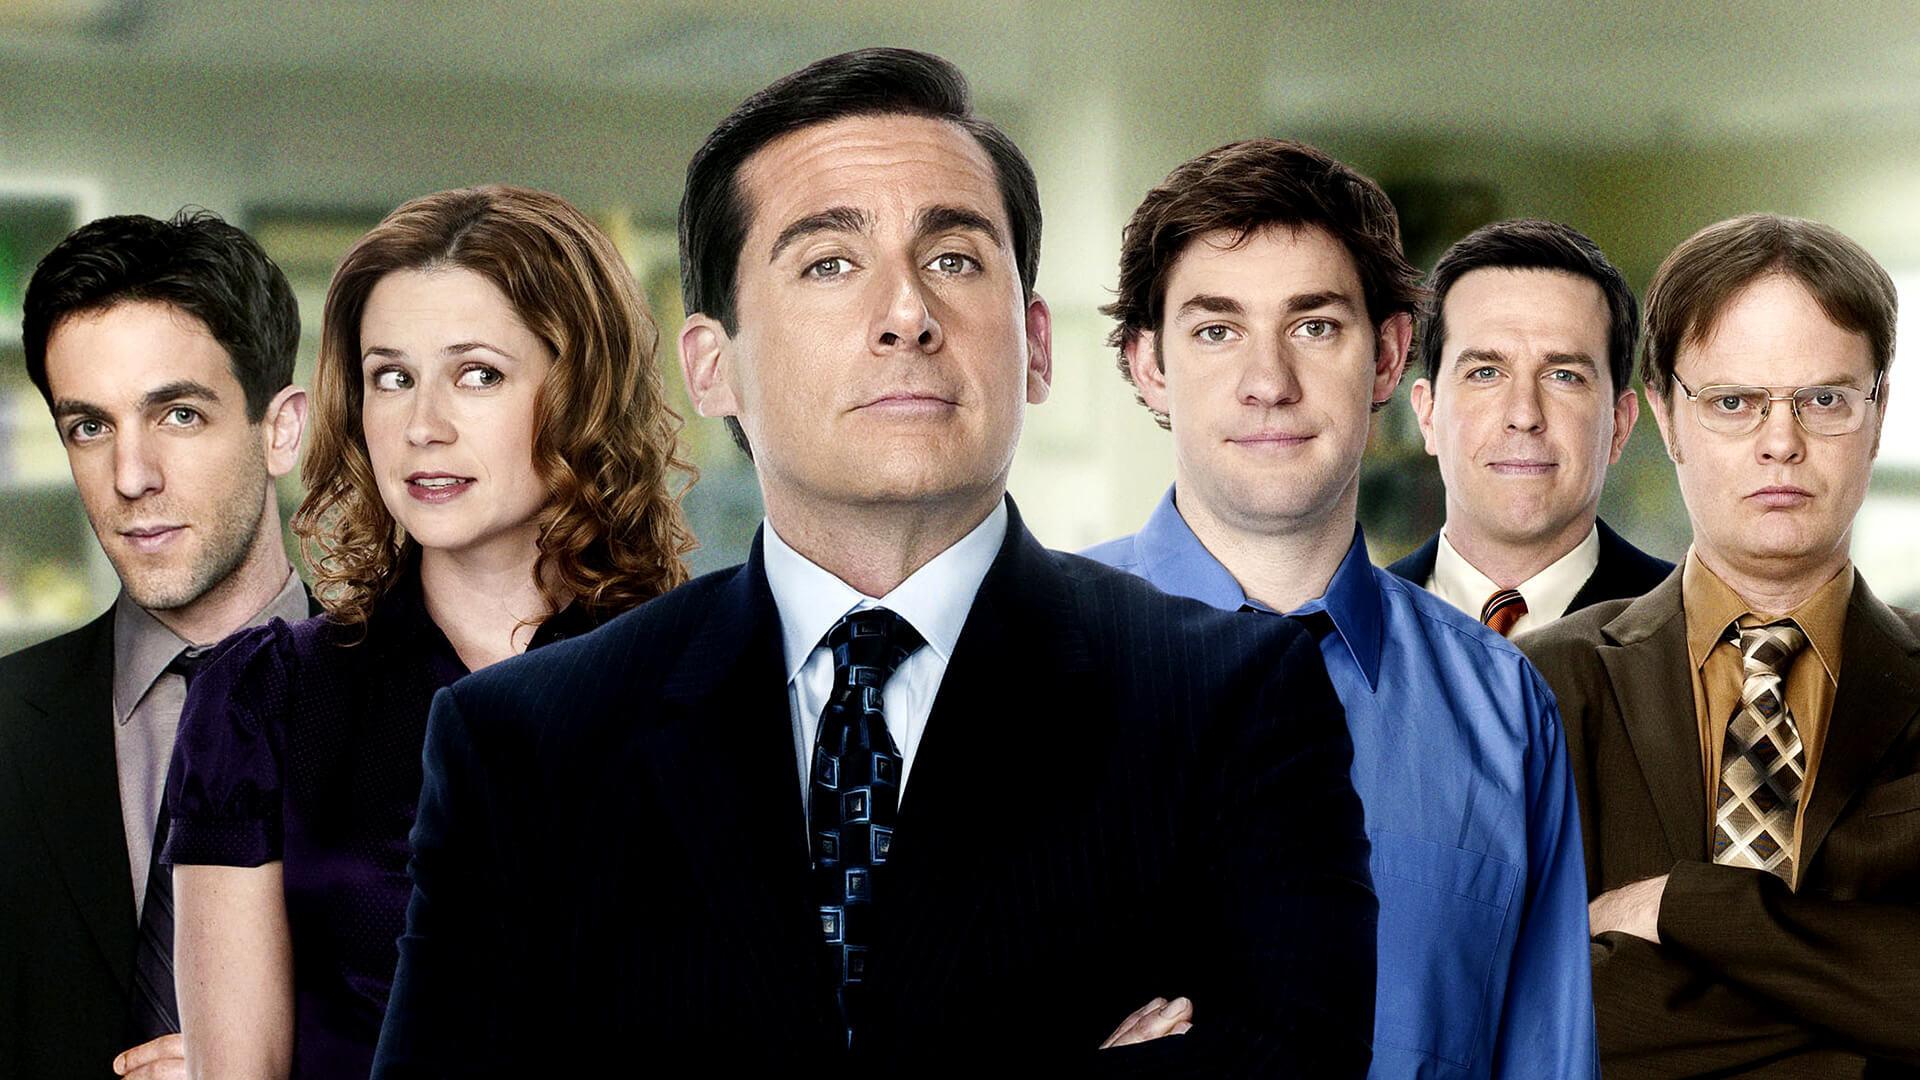 The Office (US) Wallpaper 22 X 1080